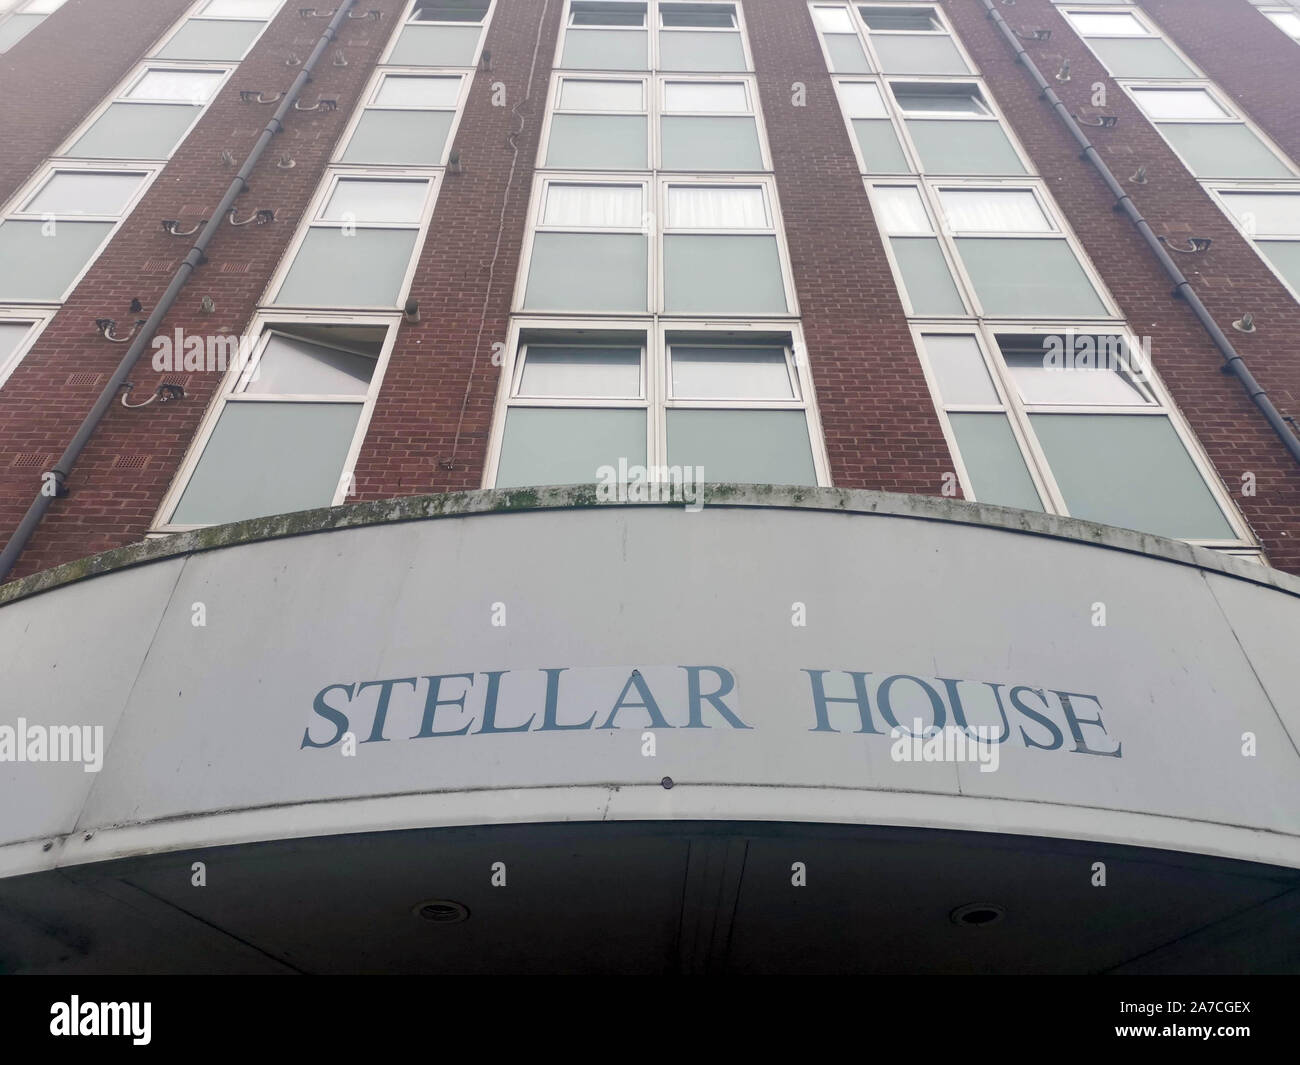 Stellar House in Tottenham, north London where a toddler has died after he fell from a window on the ninth floor. Stock Photo